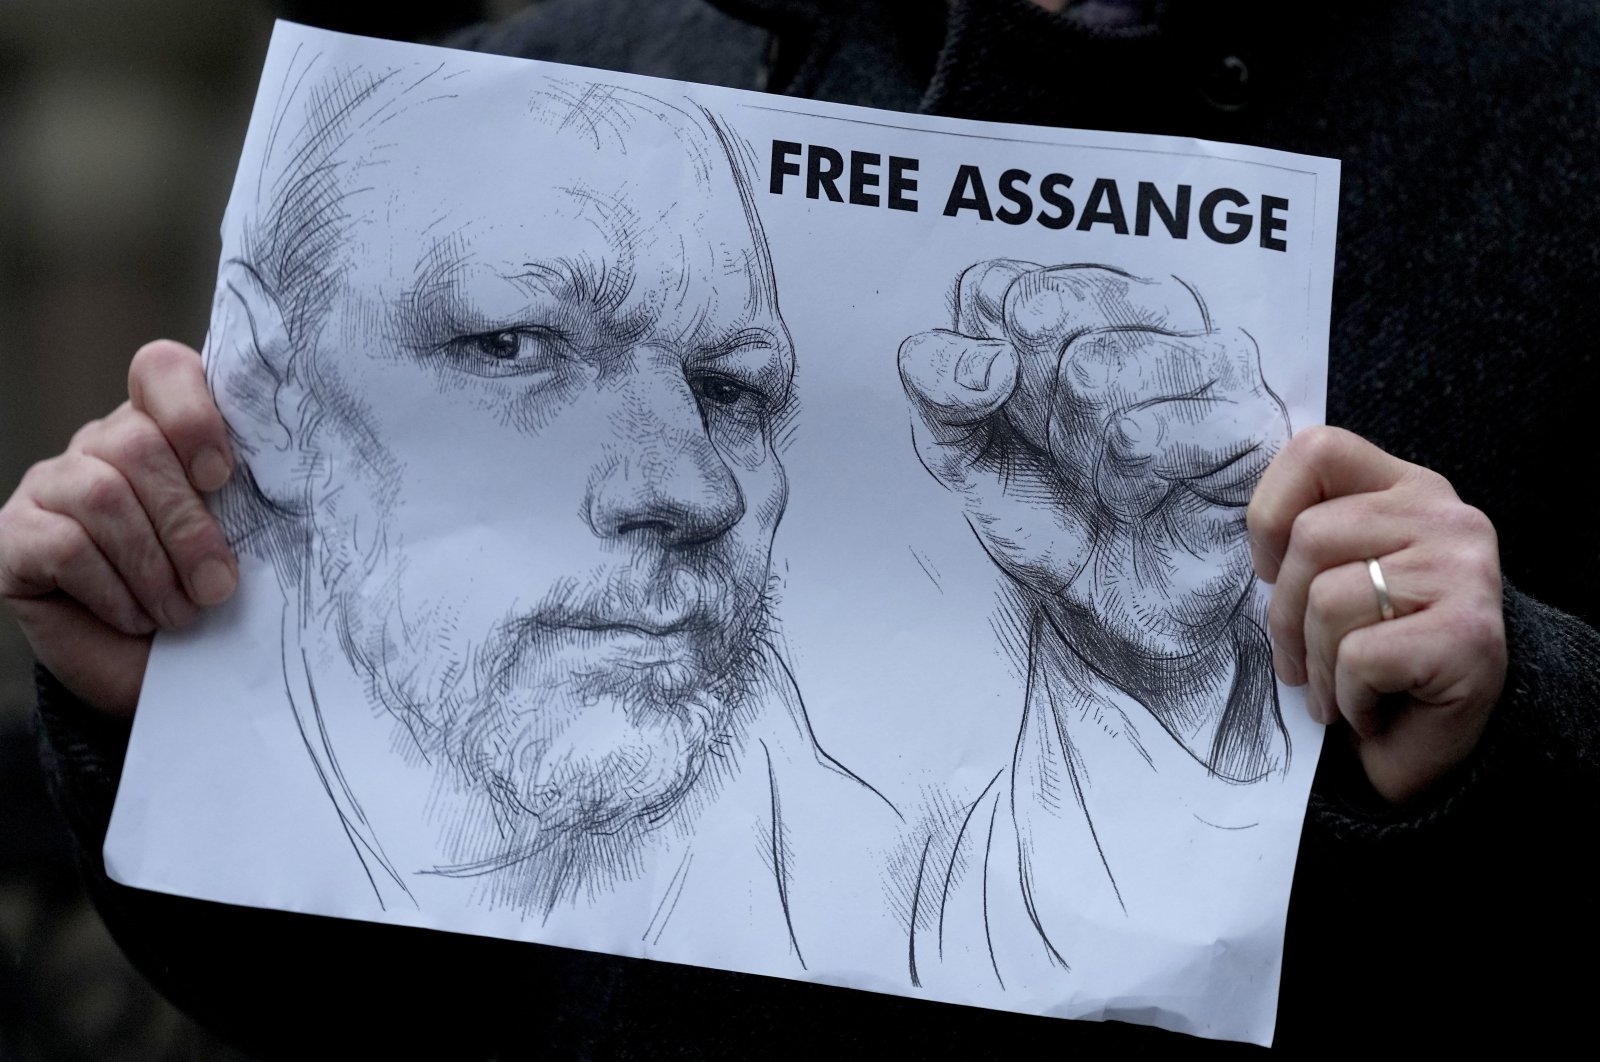 A demonstrator holds a poster as supporters of Julian Assange stage a demonstration outside the High Court in London, Britain, Oct. 27, 2021. (AP Photo)